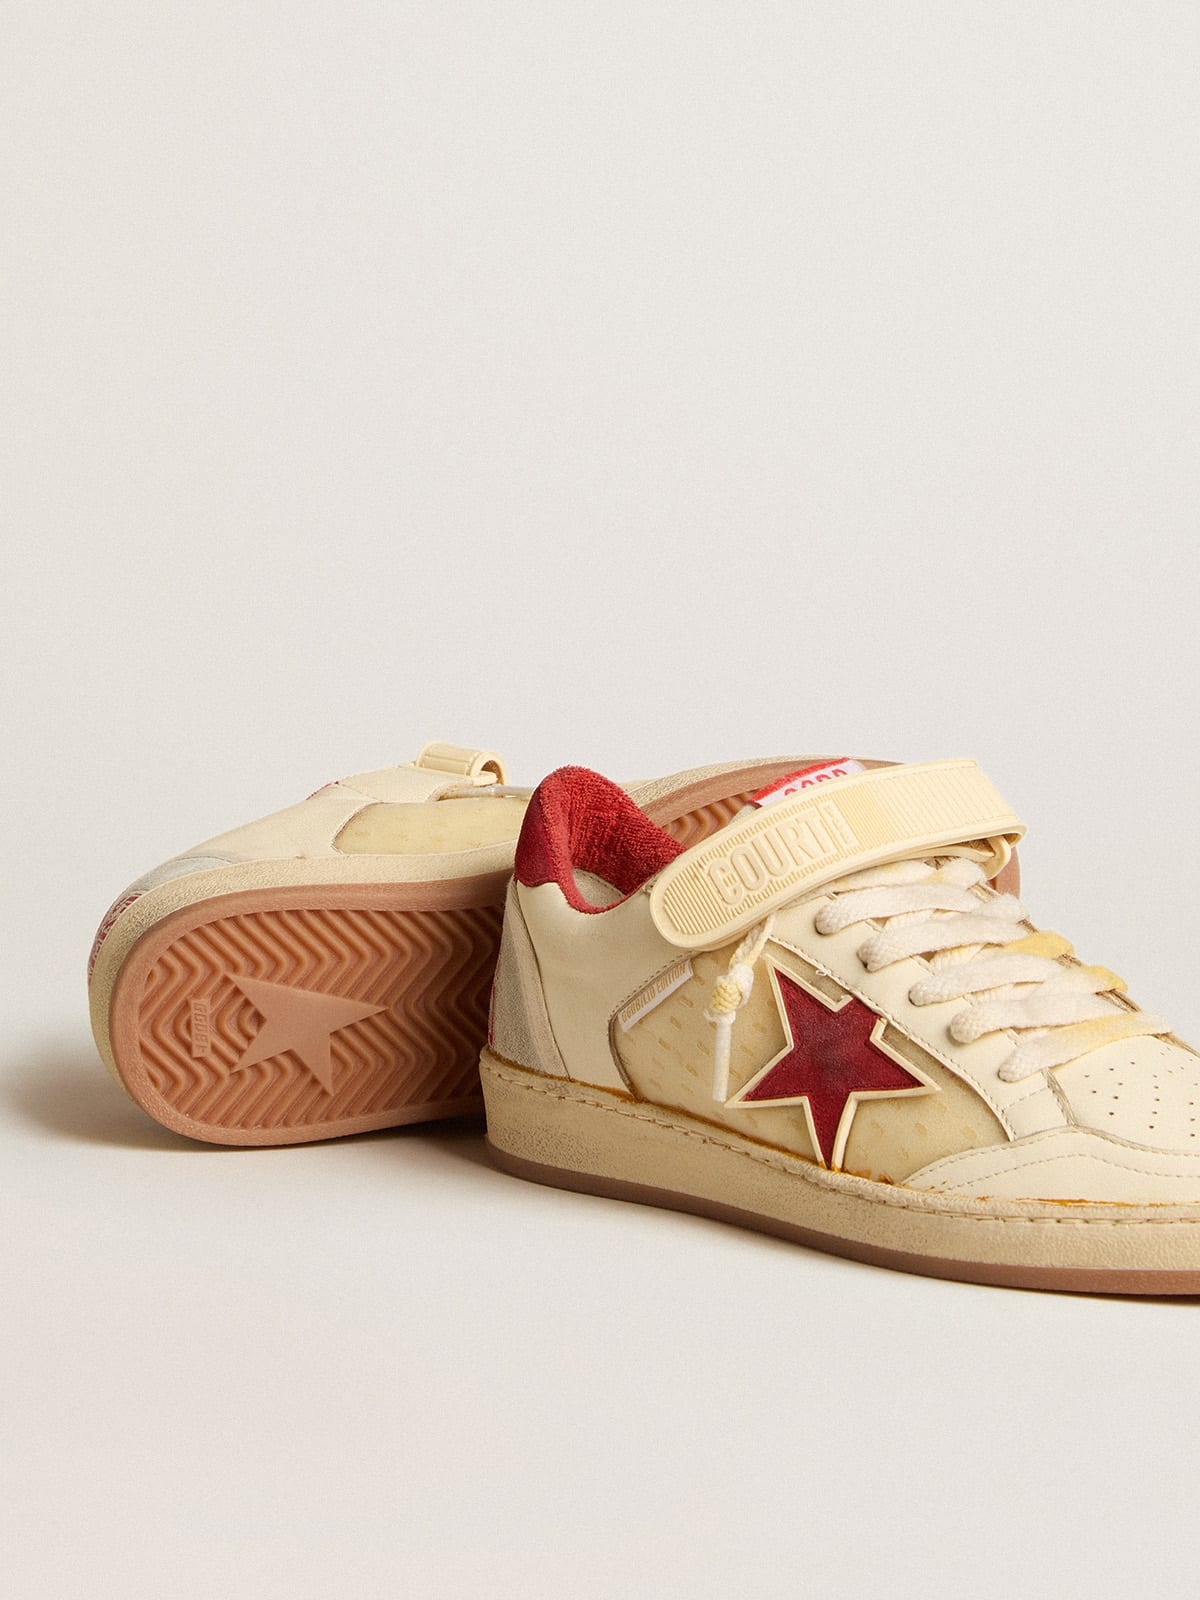 Women’s Ball Star LAB in cream-colored nappa with red suede star - 3